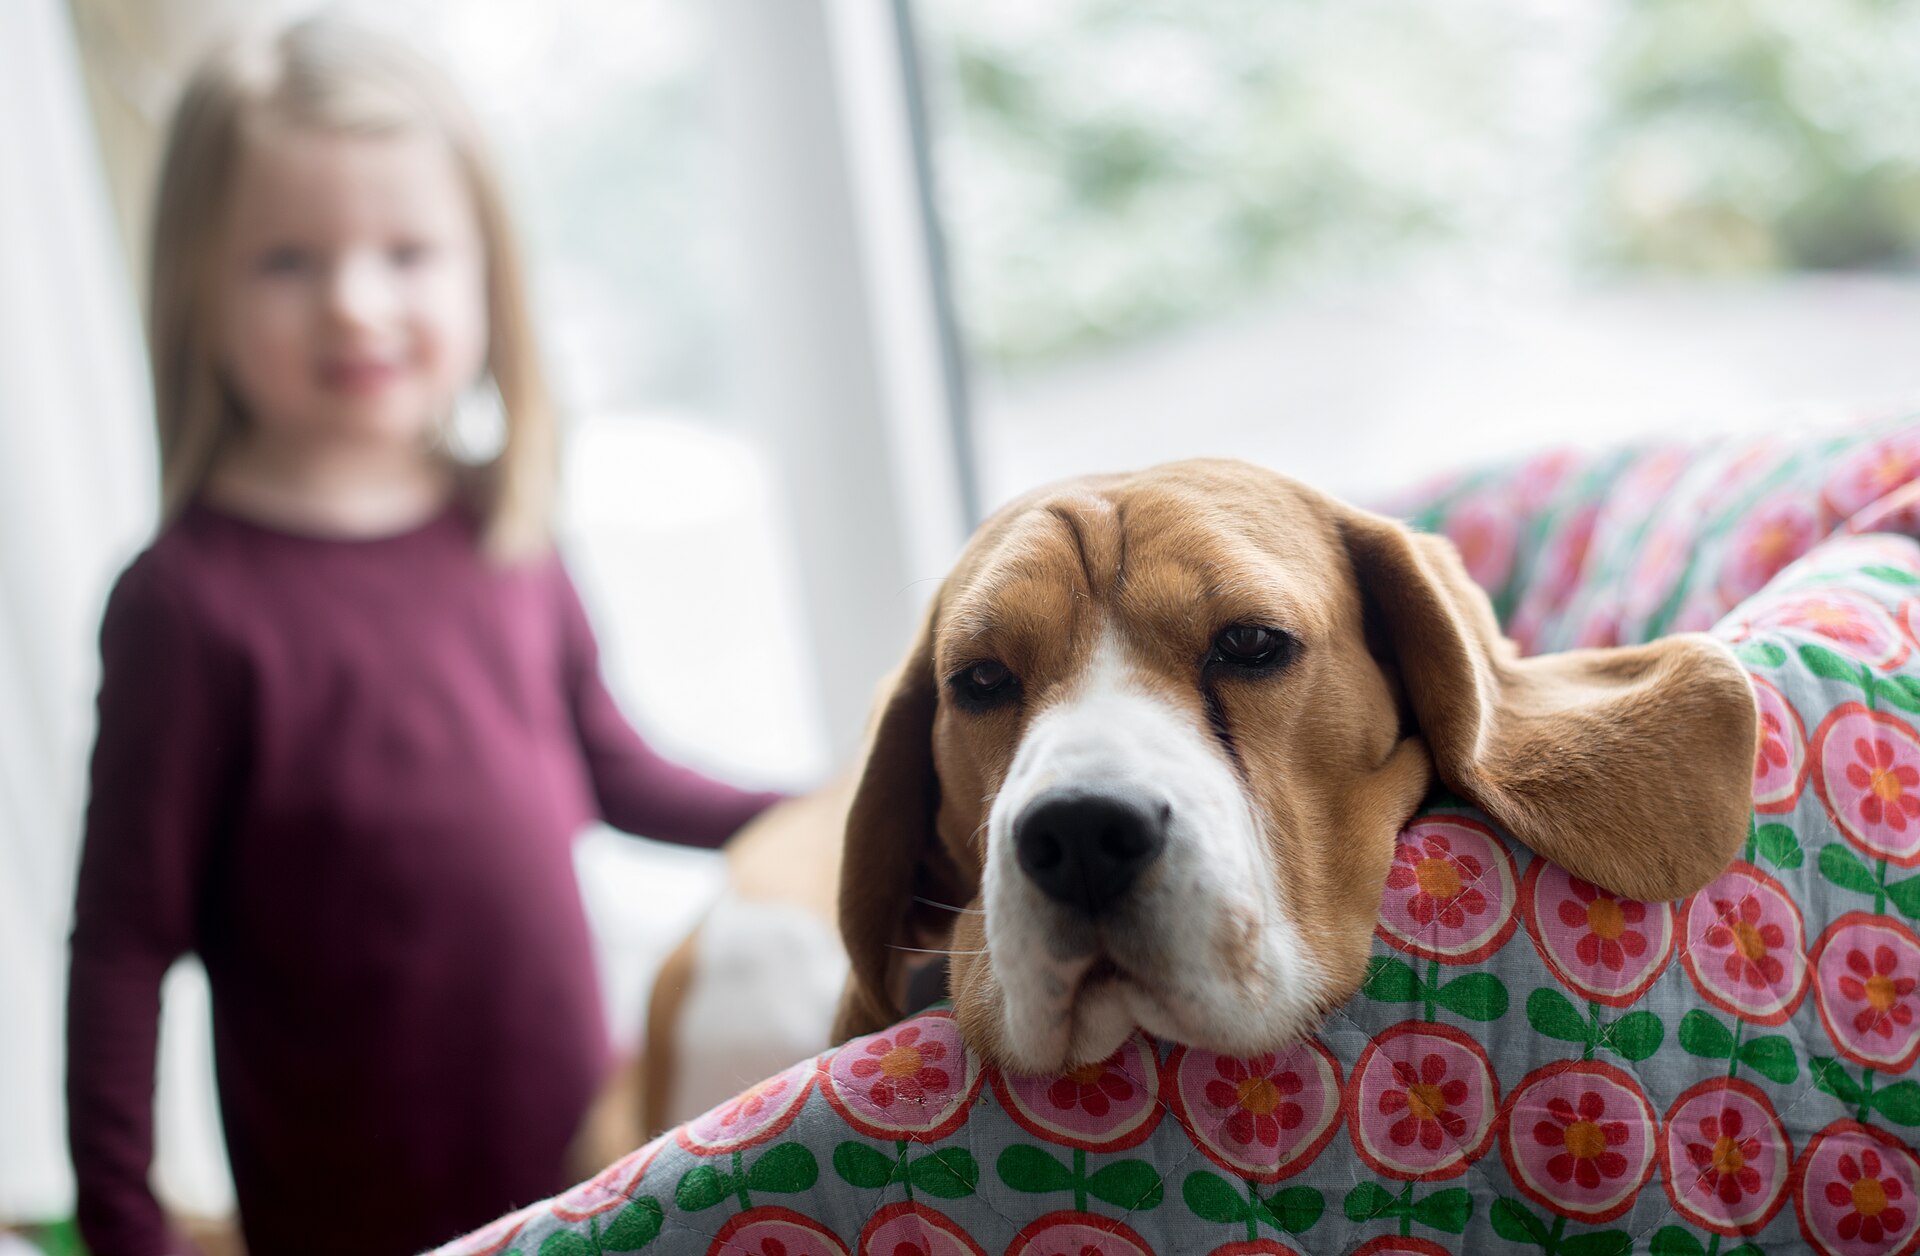 A senior Beagle rests on a couch with a child in the background